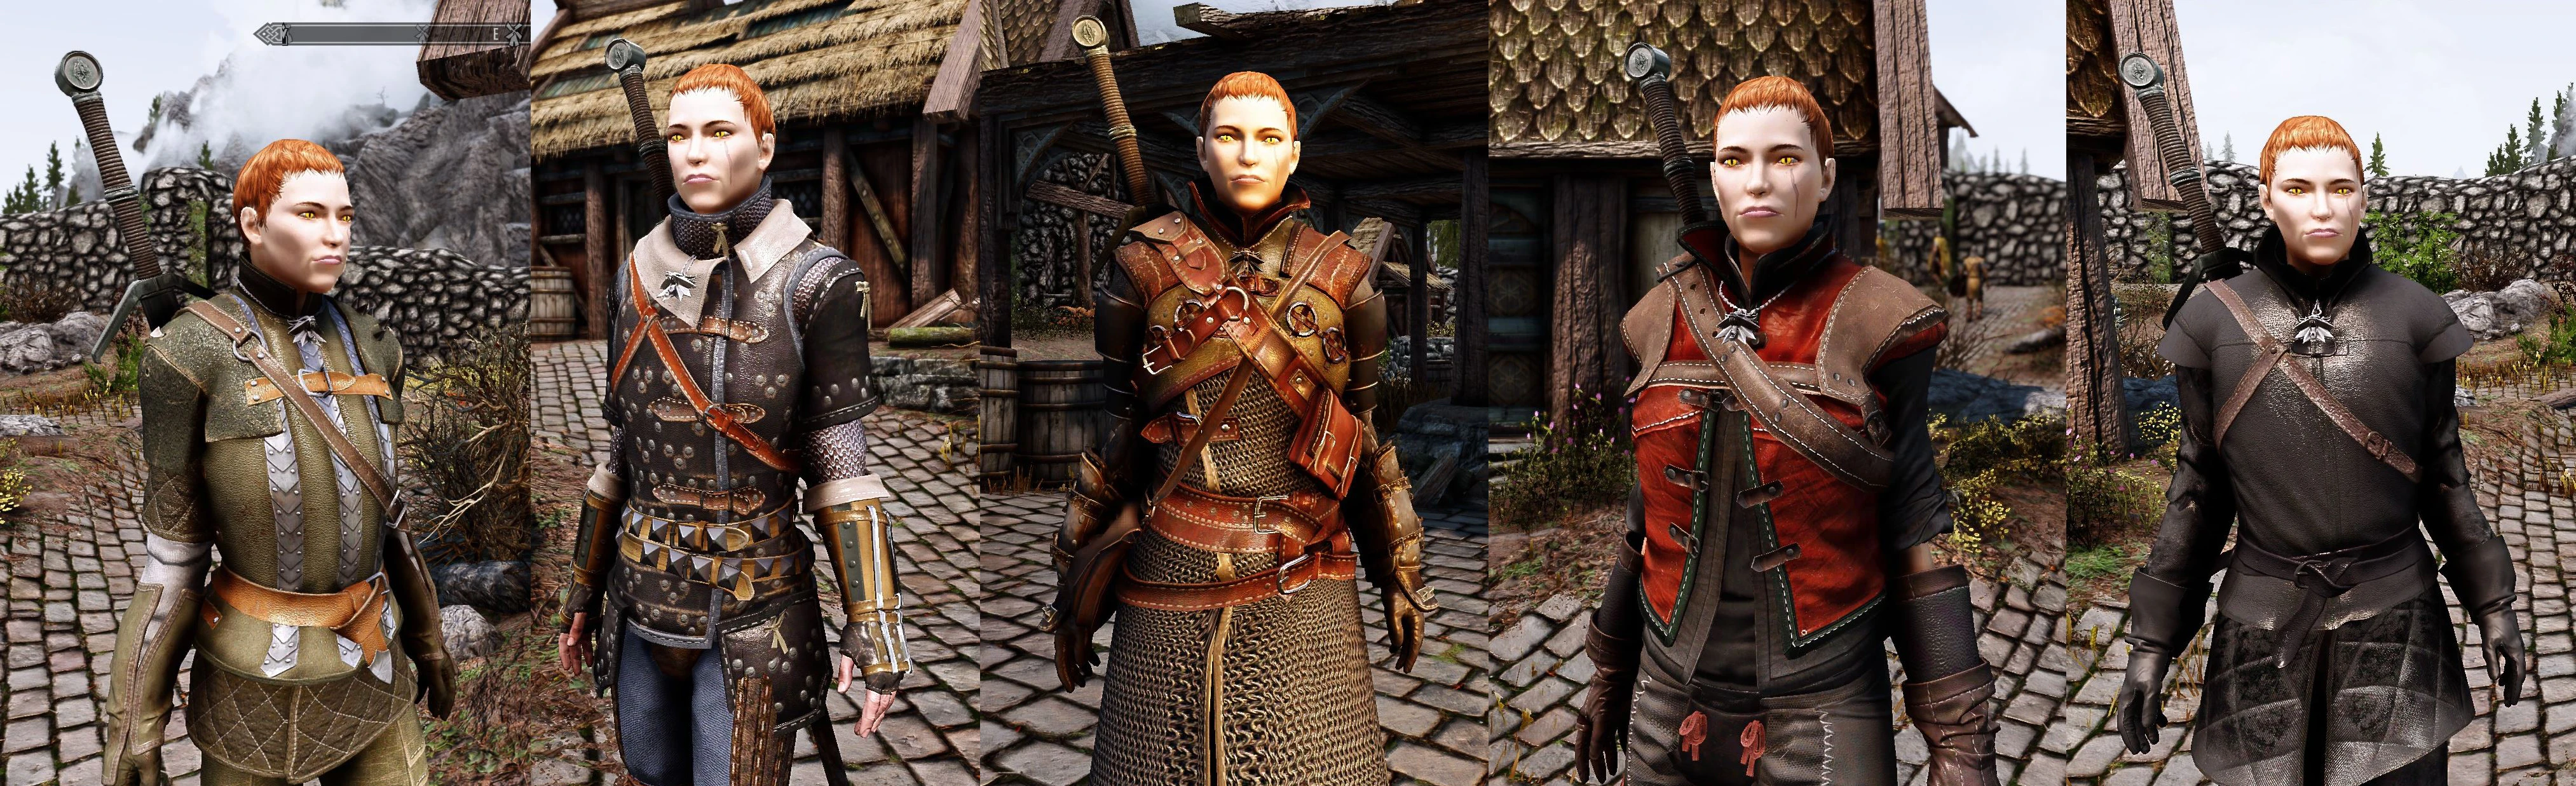 The witcher 3 armor pack фото 73